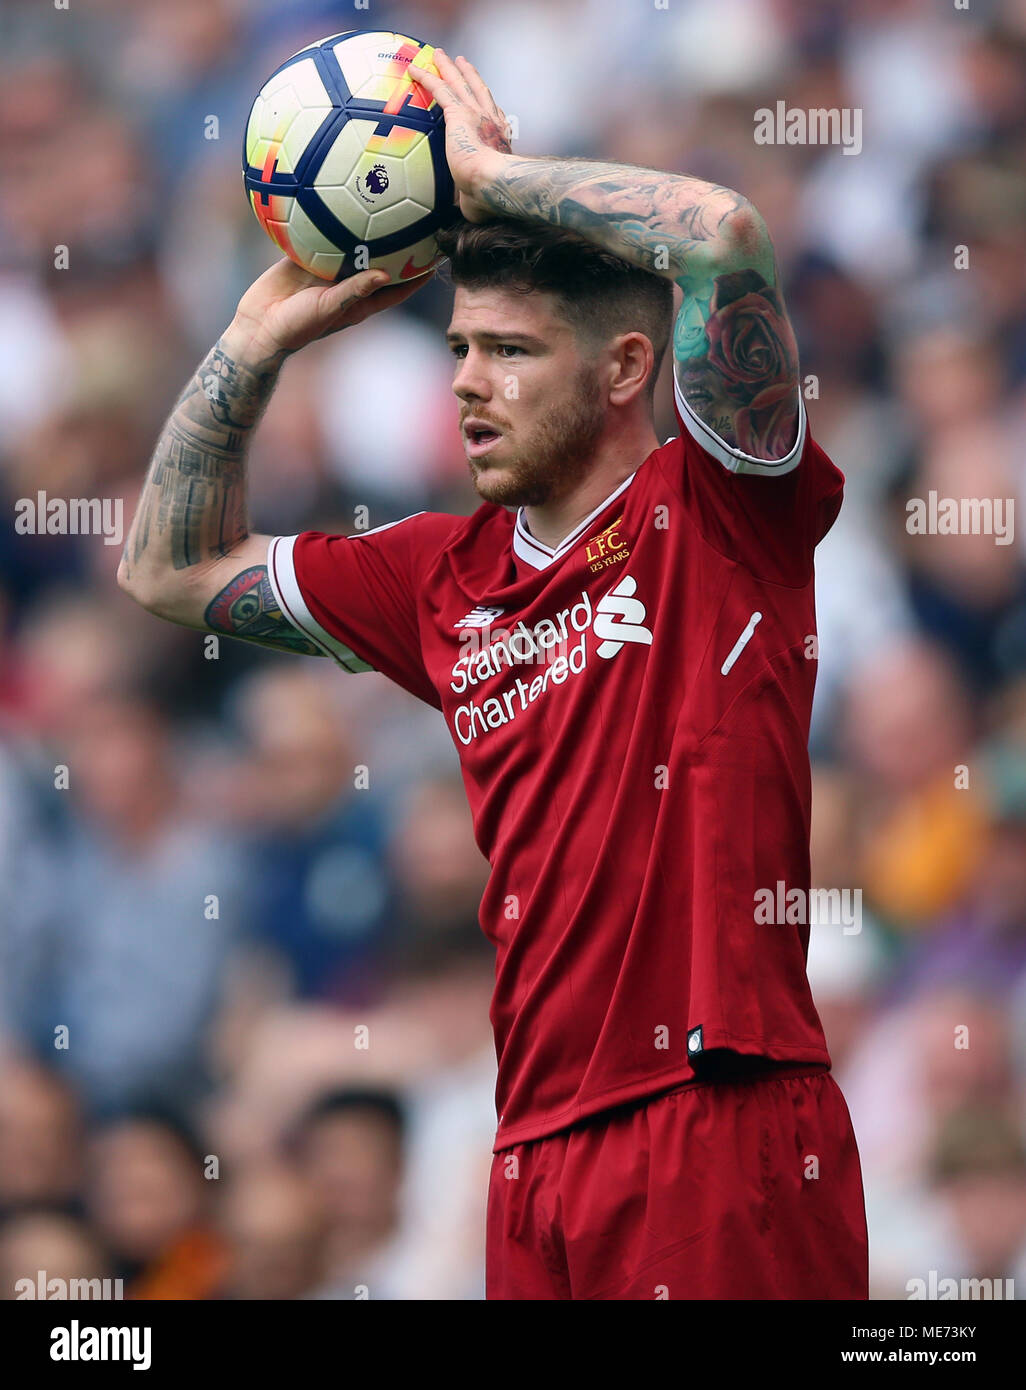 Liverpools Alberto Moreno during the Premier League match at The Hawthorns, West Bromwich. PRESS ASSOCIATION Photo. Picture date Saturday April 21, 2018